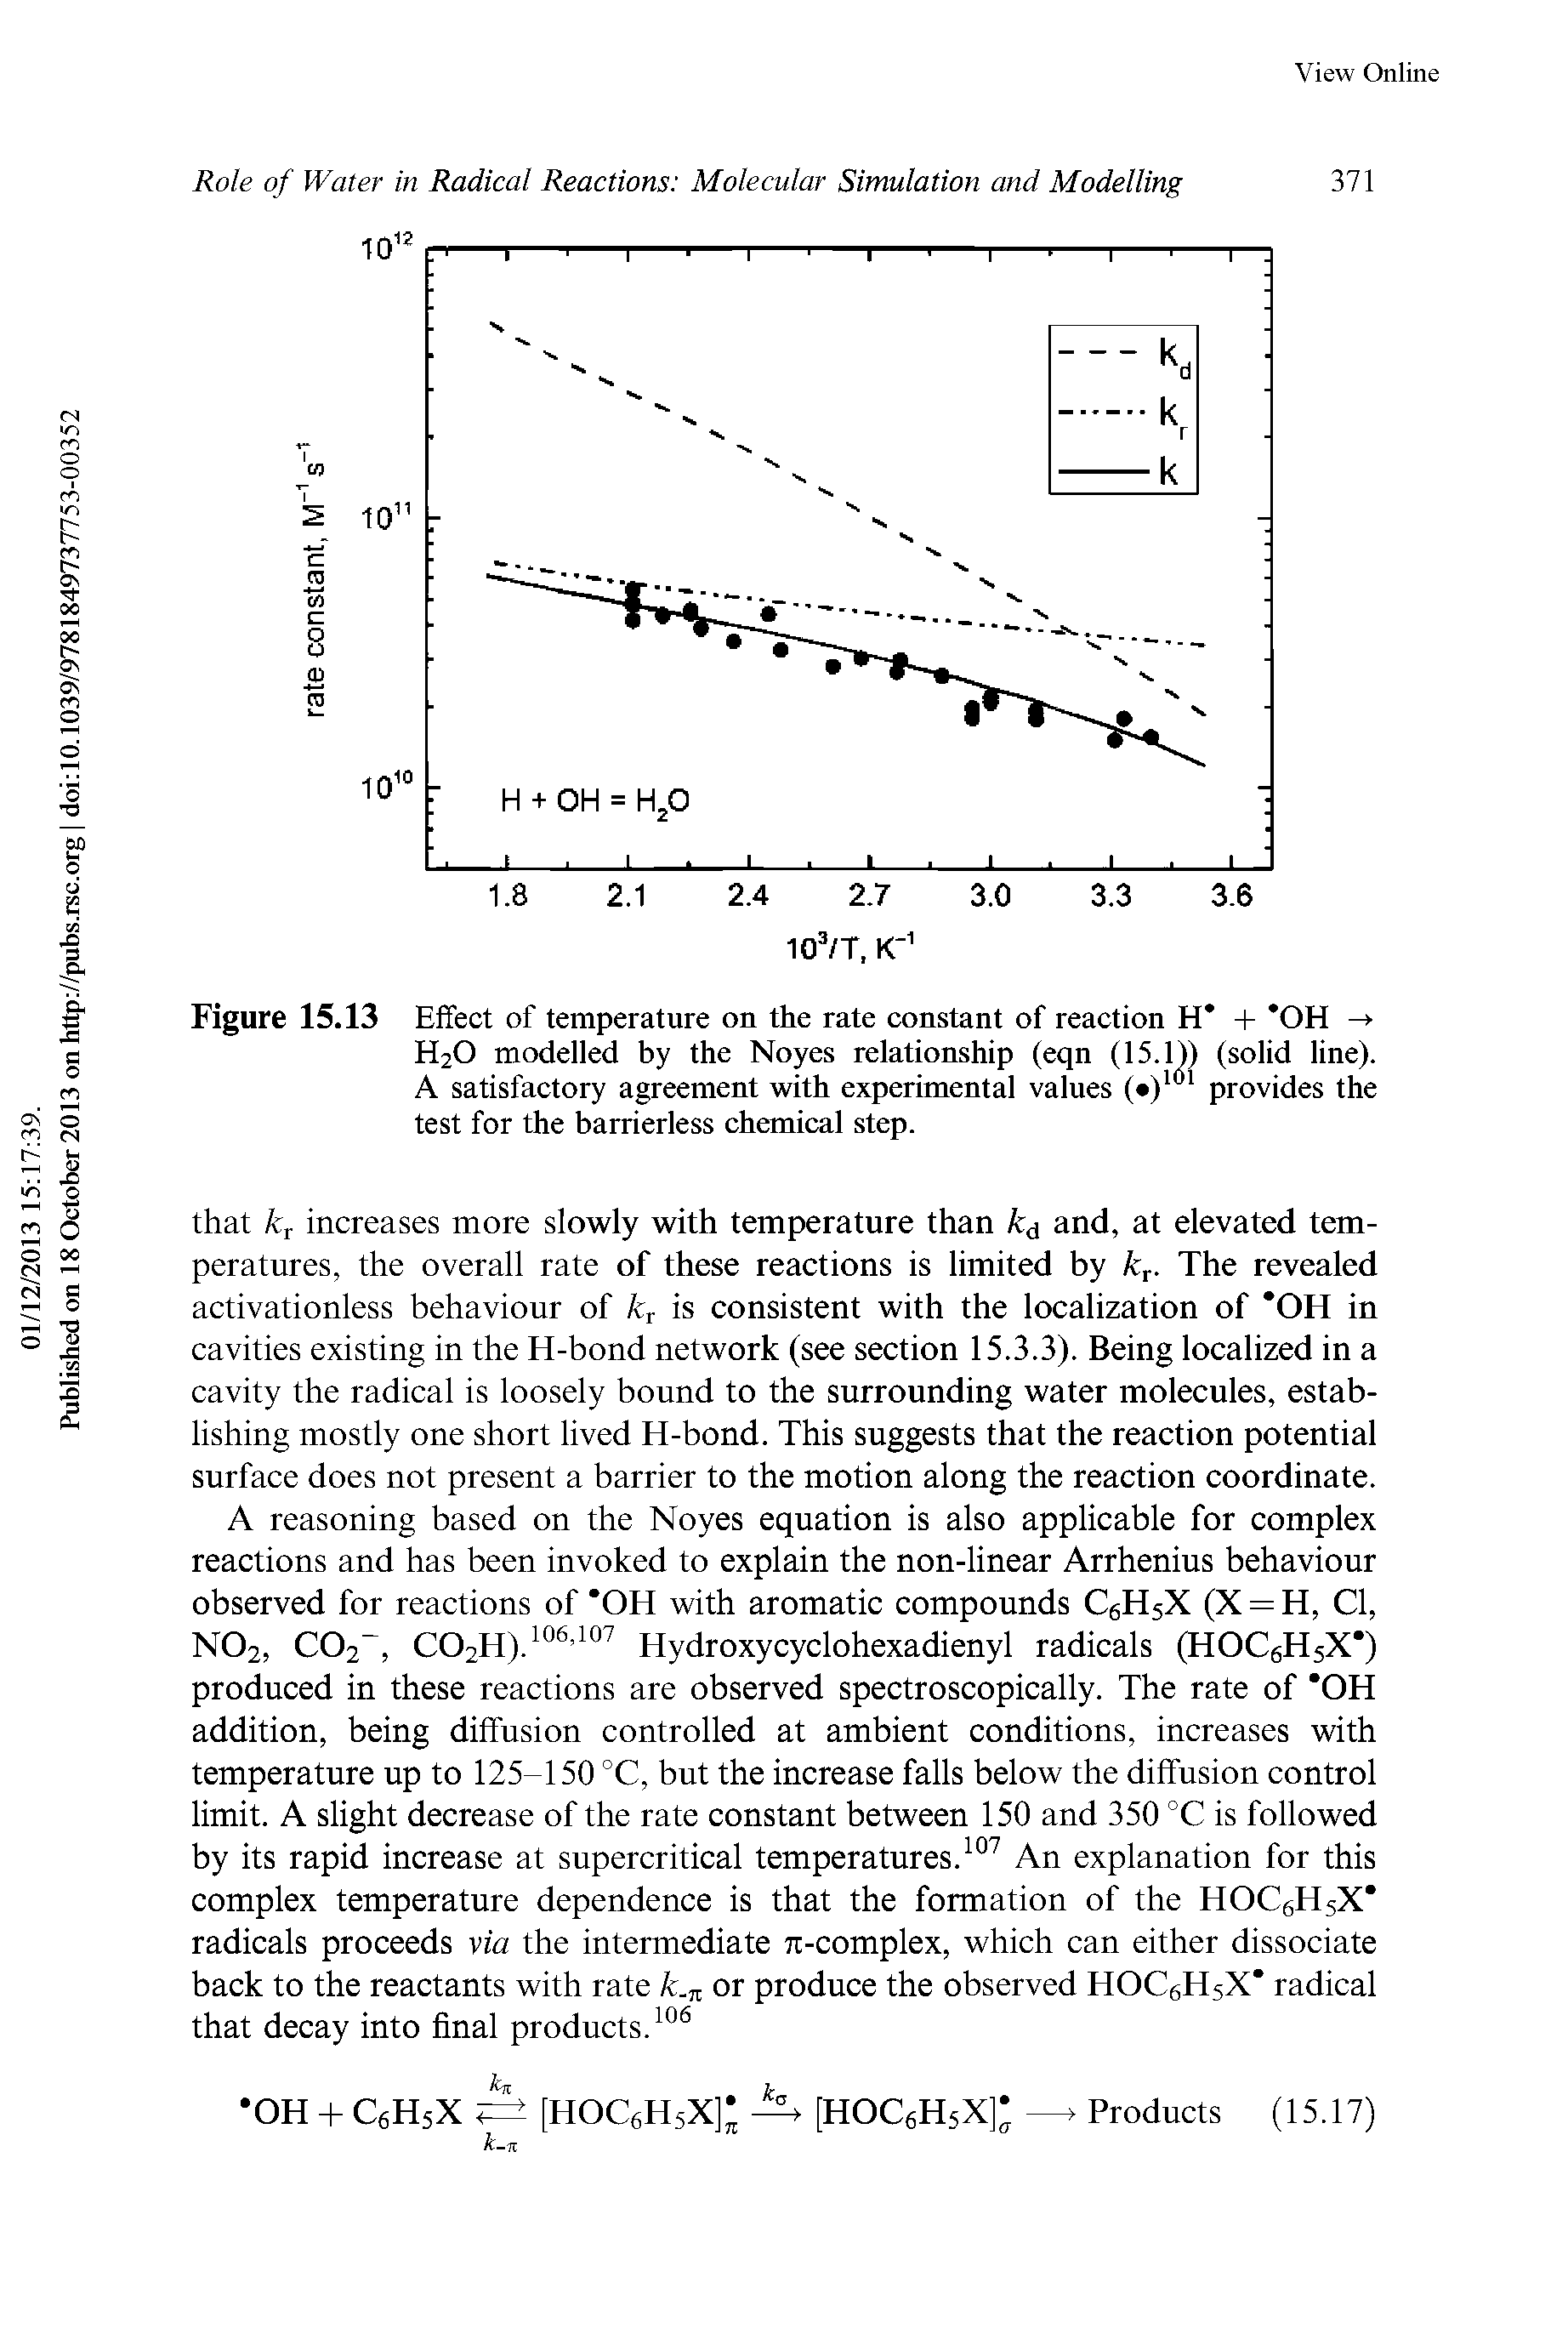 Figure 15.13 Effect of temperature on the rate constant of reaction H + OH - H2O modelled by the Noyes relationship (eqn (15.1)) (solid line). A satisfactory agreement with experimental values ( ) " provides the test for the barrierless chemical step.